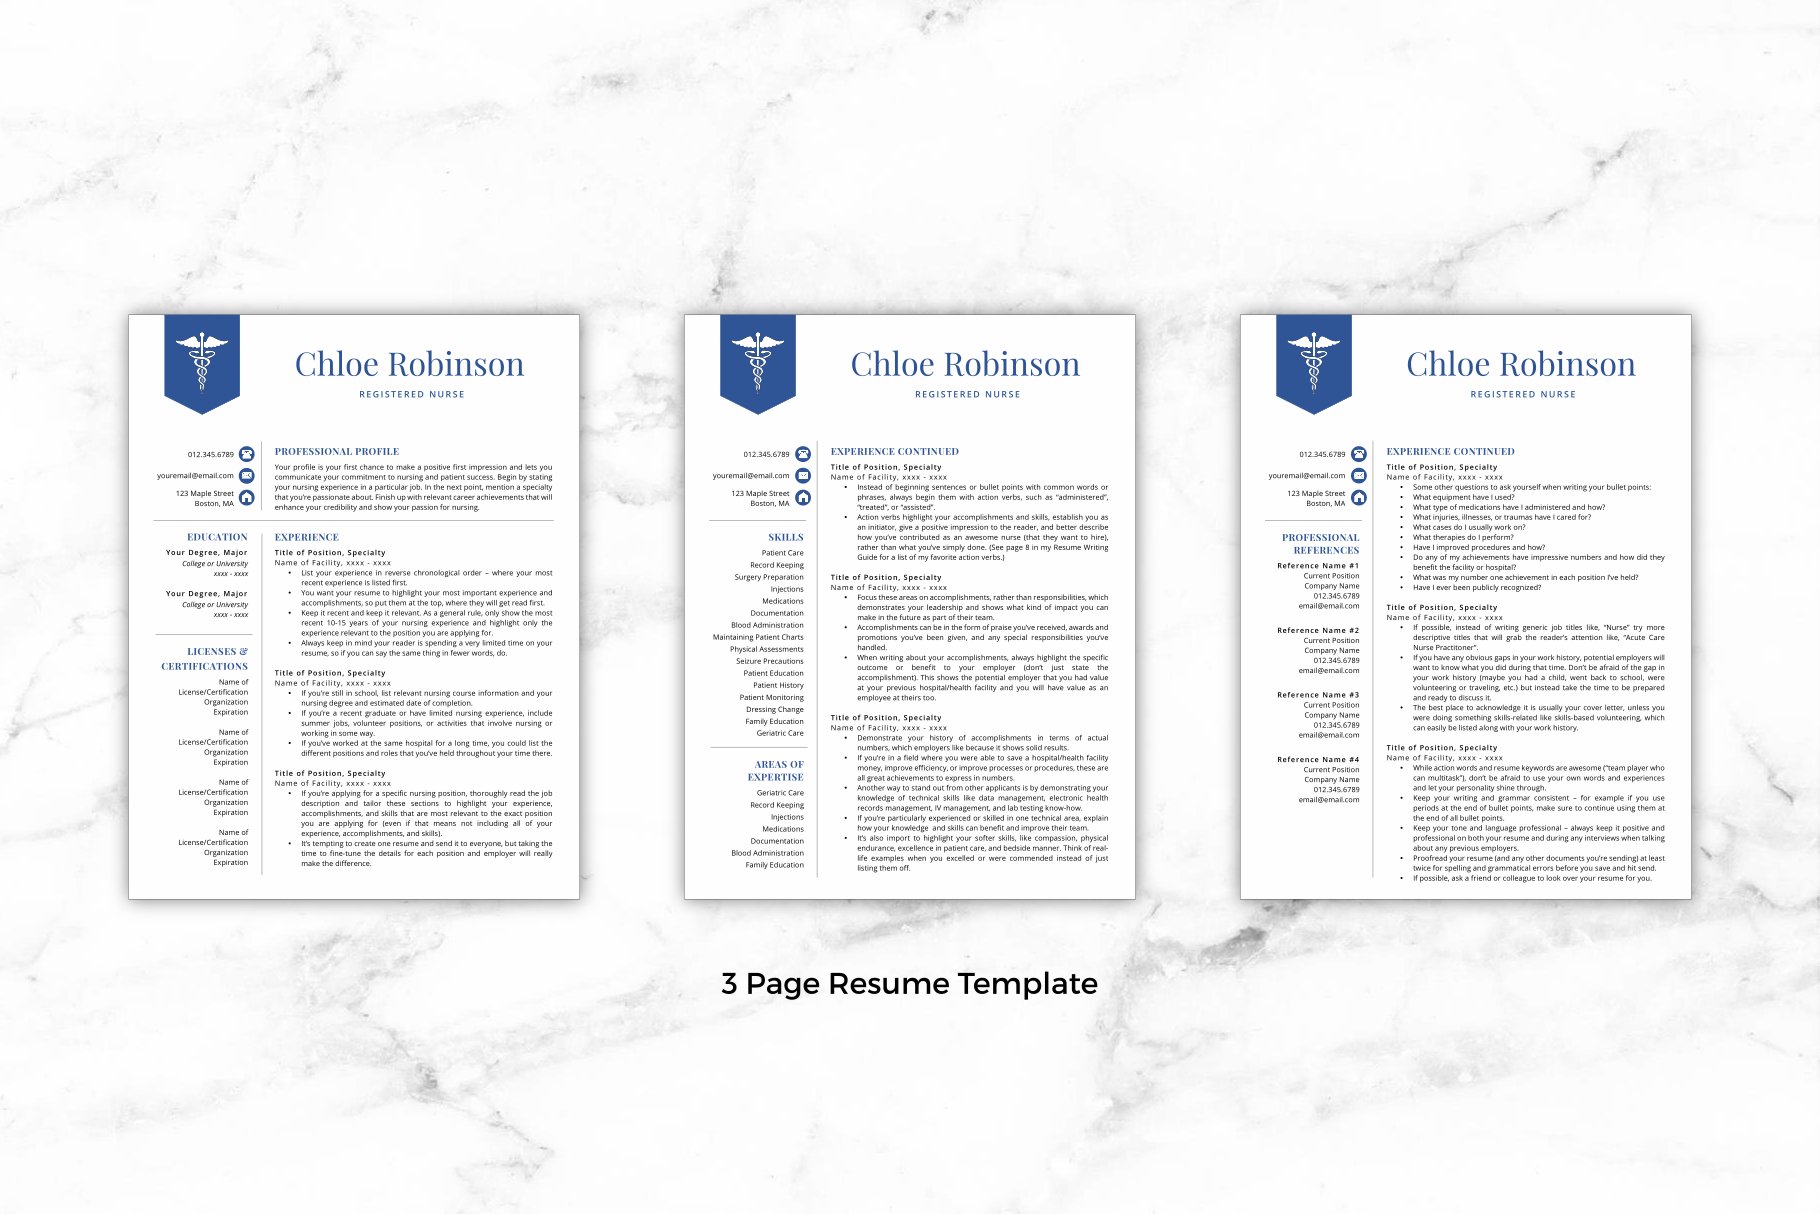 Three pages of a resume on a marble background.